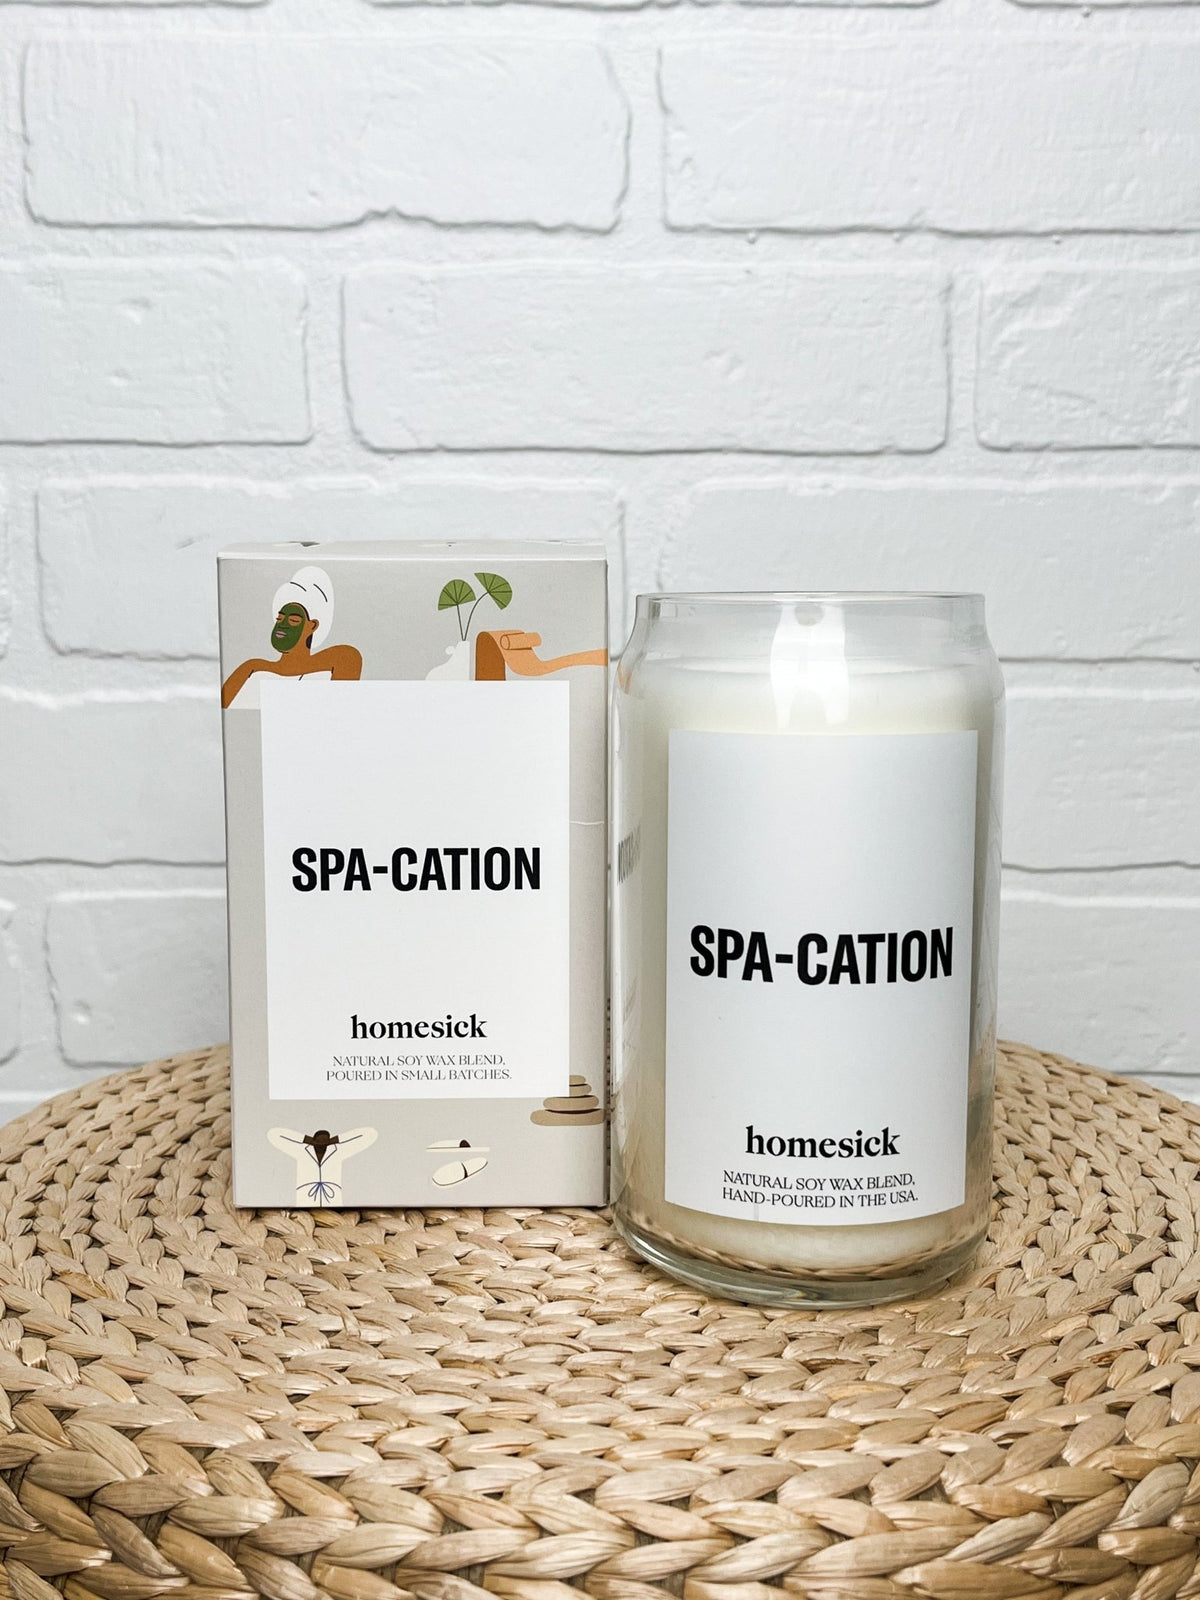 Homesick Spa-cation candle - Trendy Candles at Lush Fashion Lounge Boutique in Oklahoma City